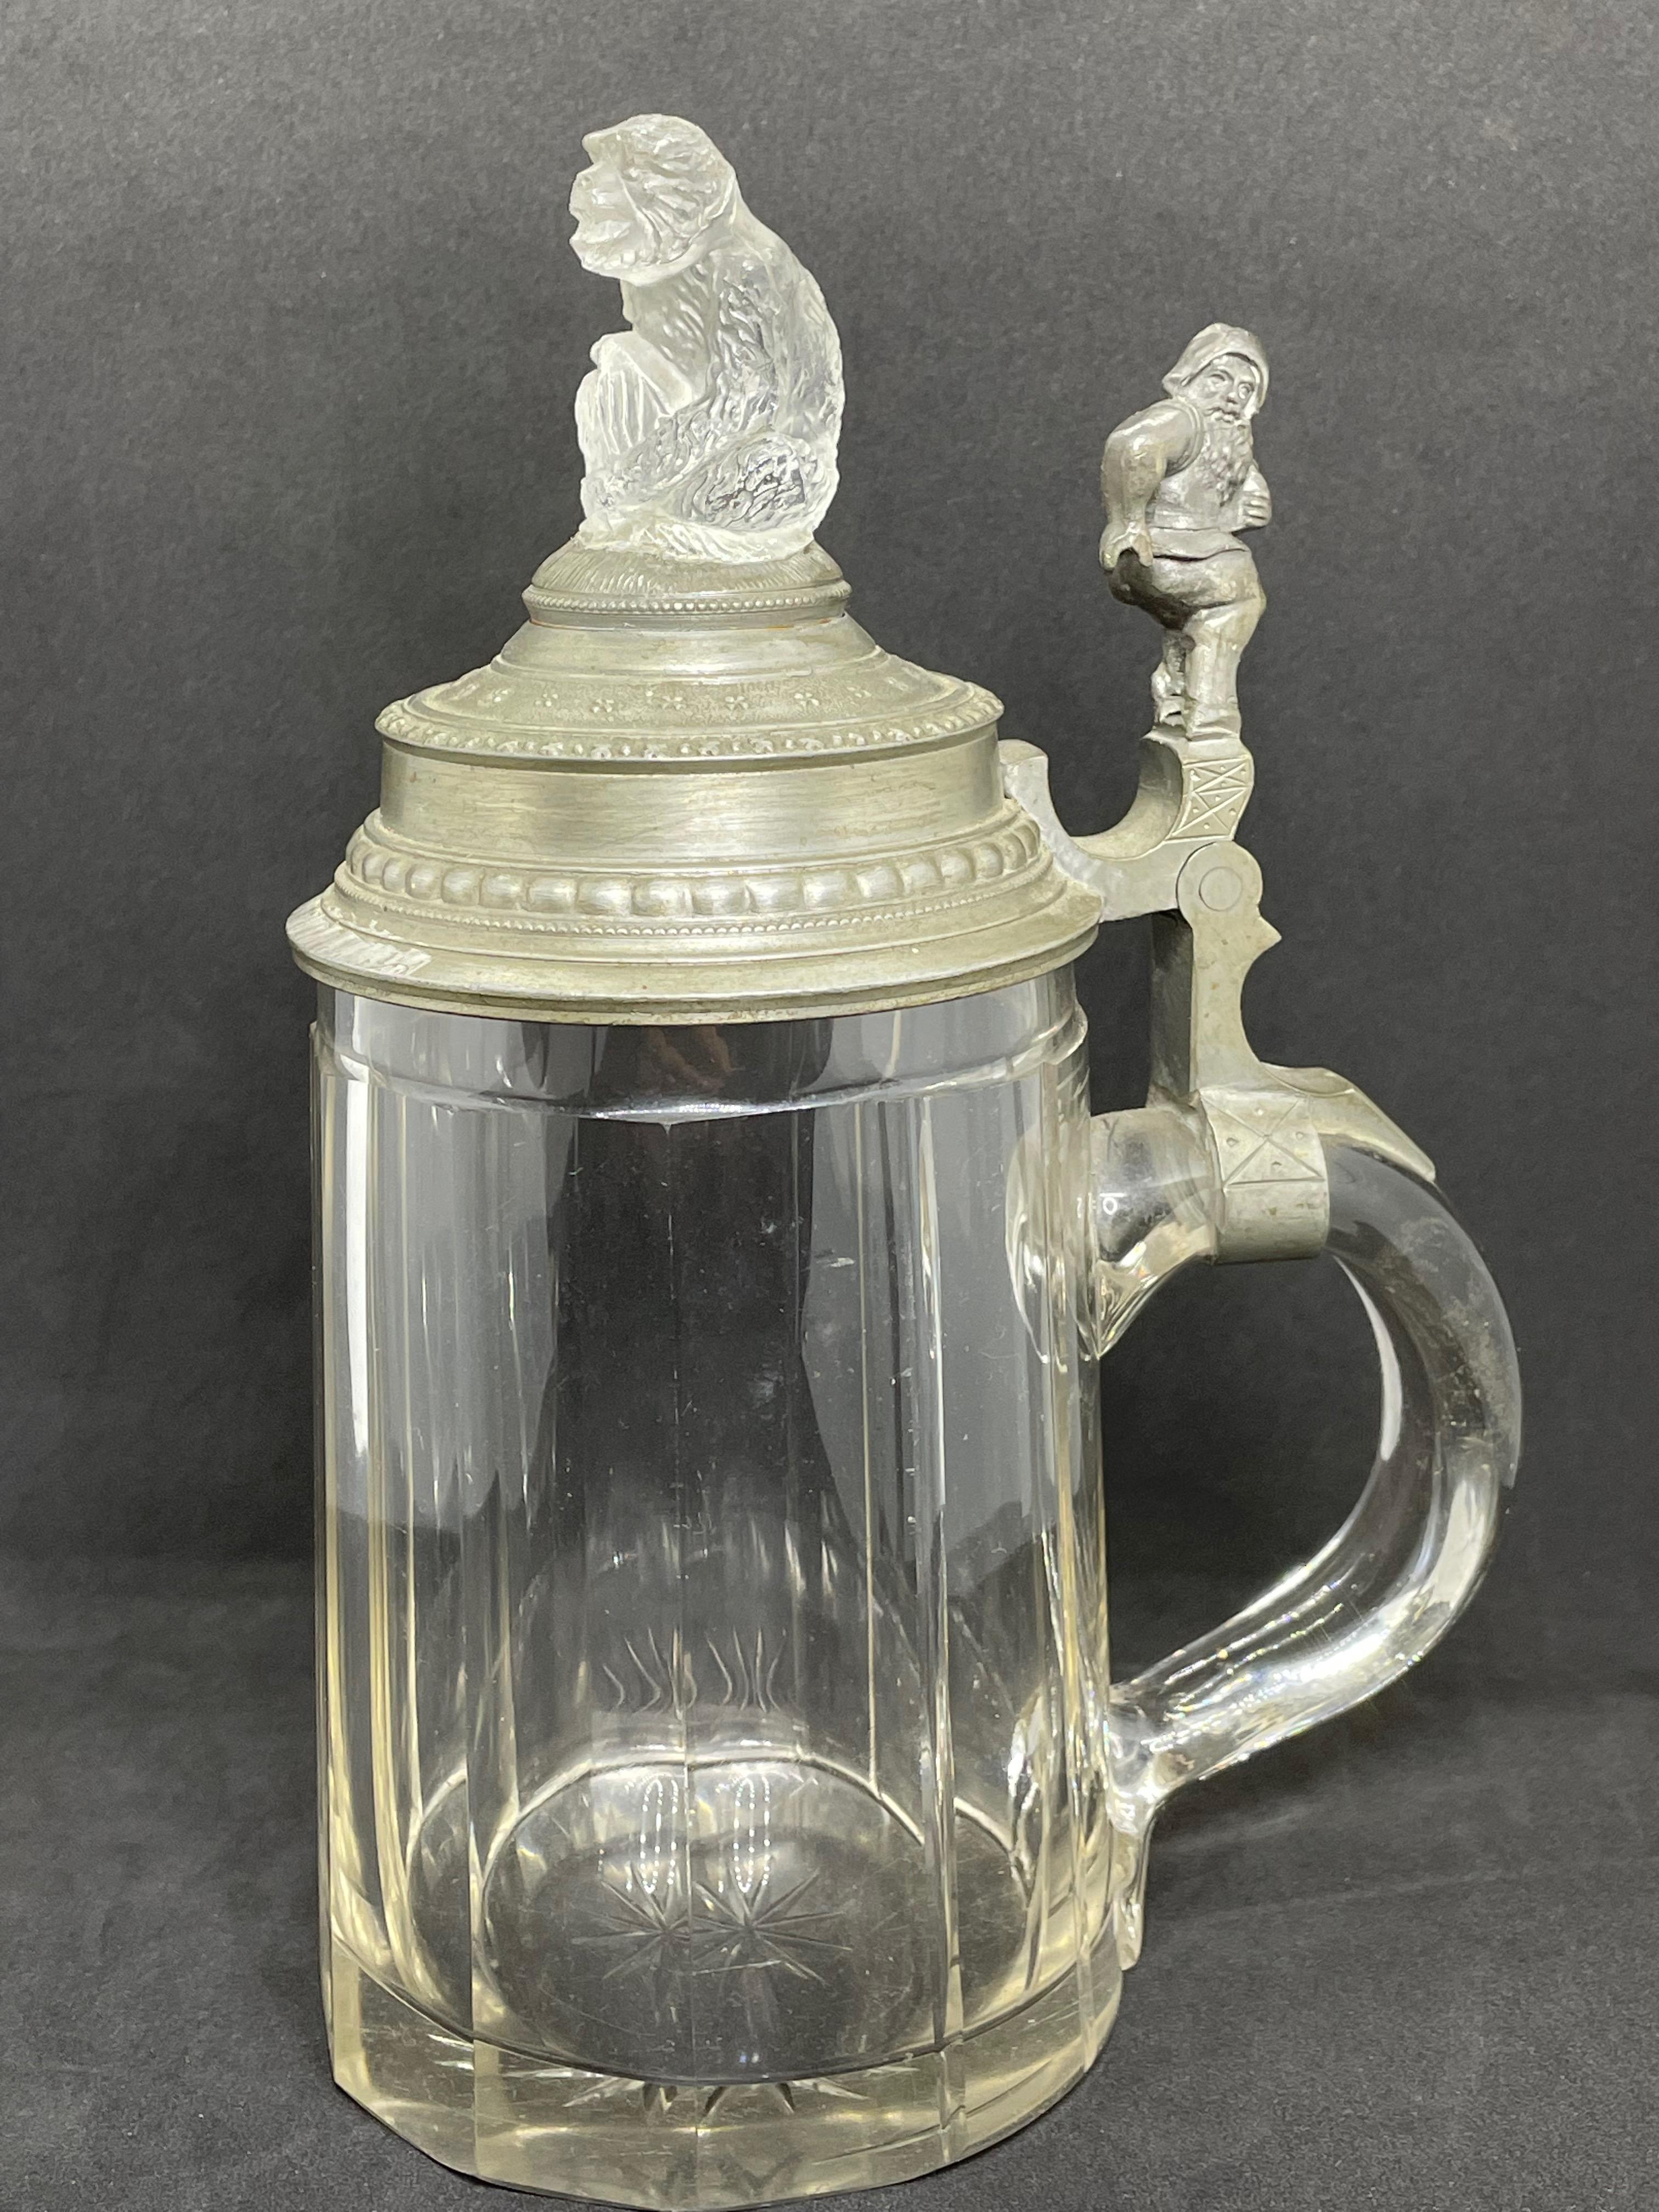 A gorgeous beer stein, made in Germany. This beer stein has been made in Germany, circa 1890s. Absolutely gorgeous piece still in great condition, without damage. Lid works properly. It is a 1/2 Liter Stein. Has a glass Ape figure on top and a gnome